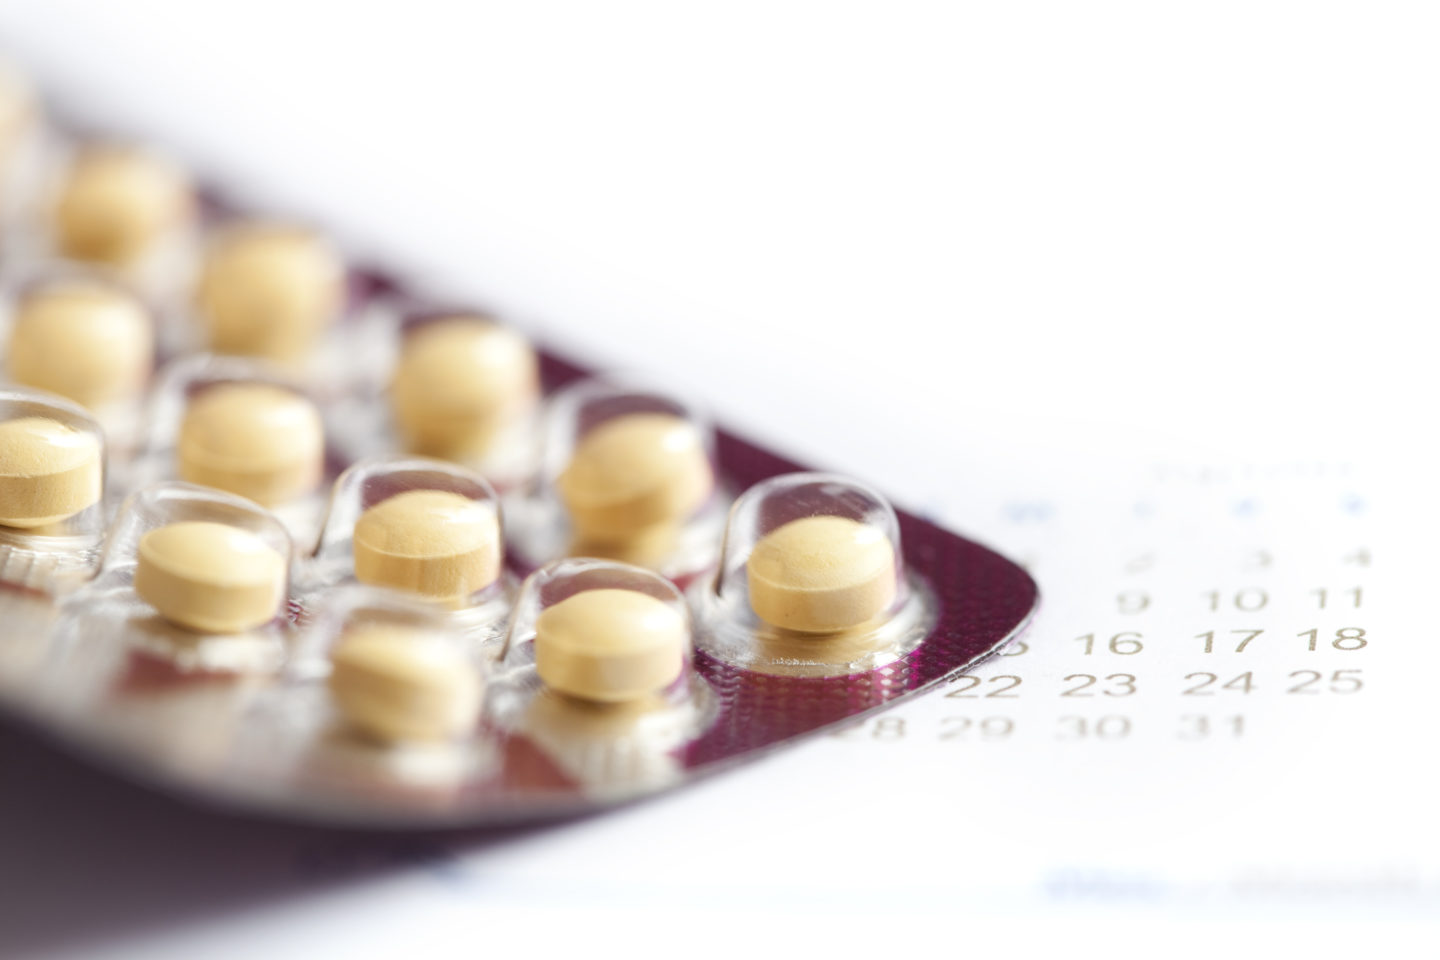 How Does Hormonal Birth Control Affect Women With Mood Disorders?